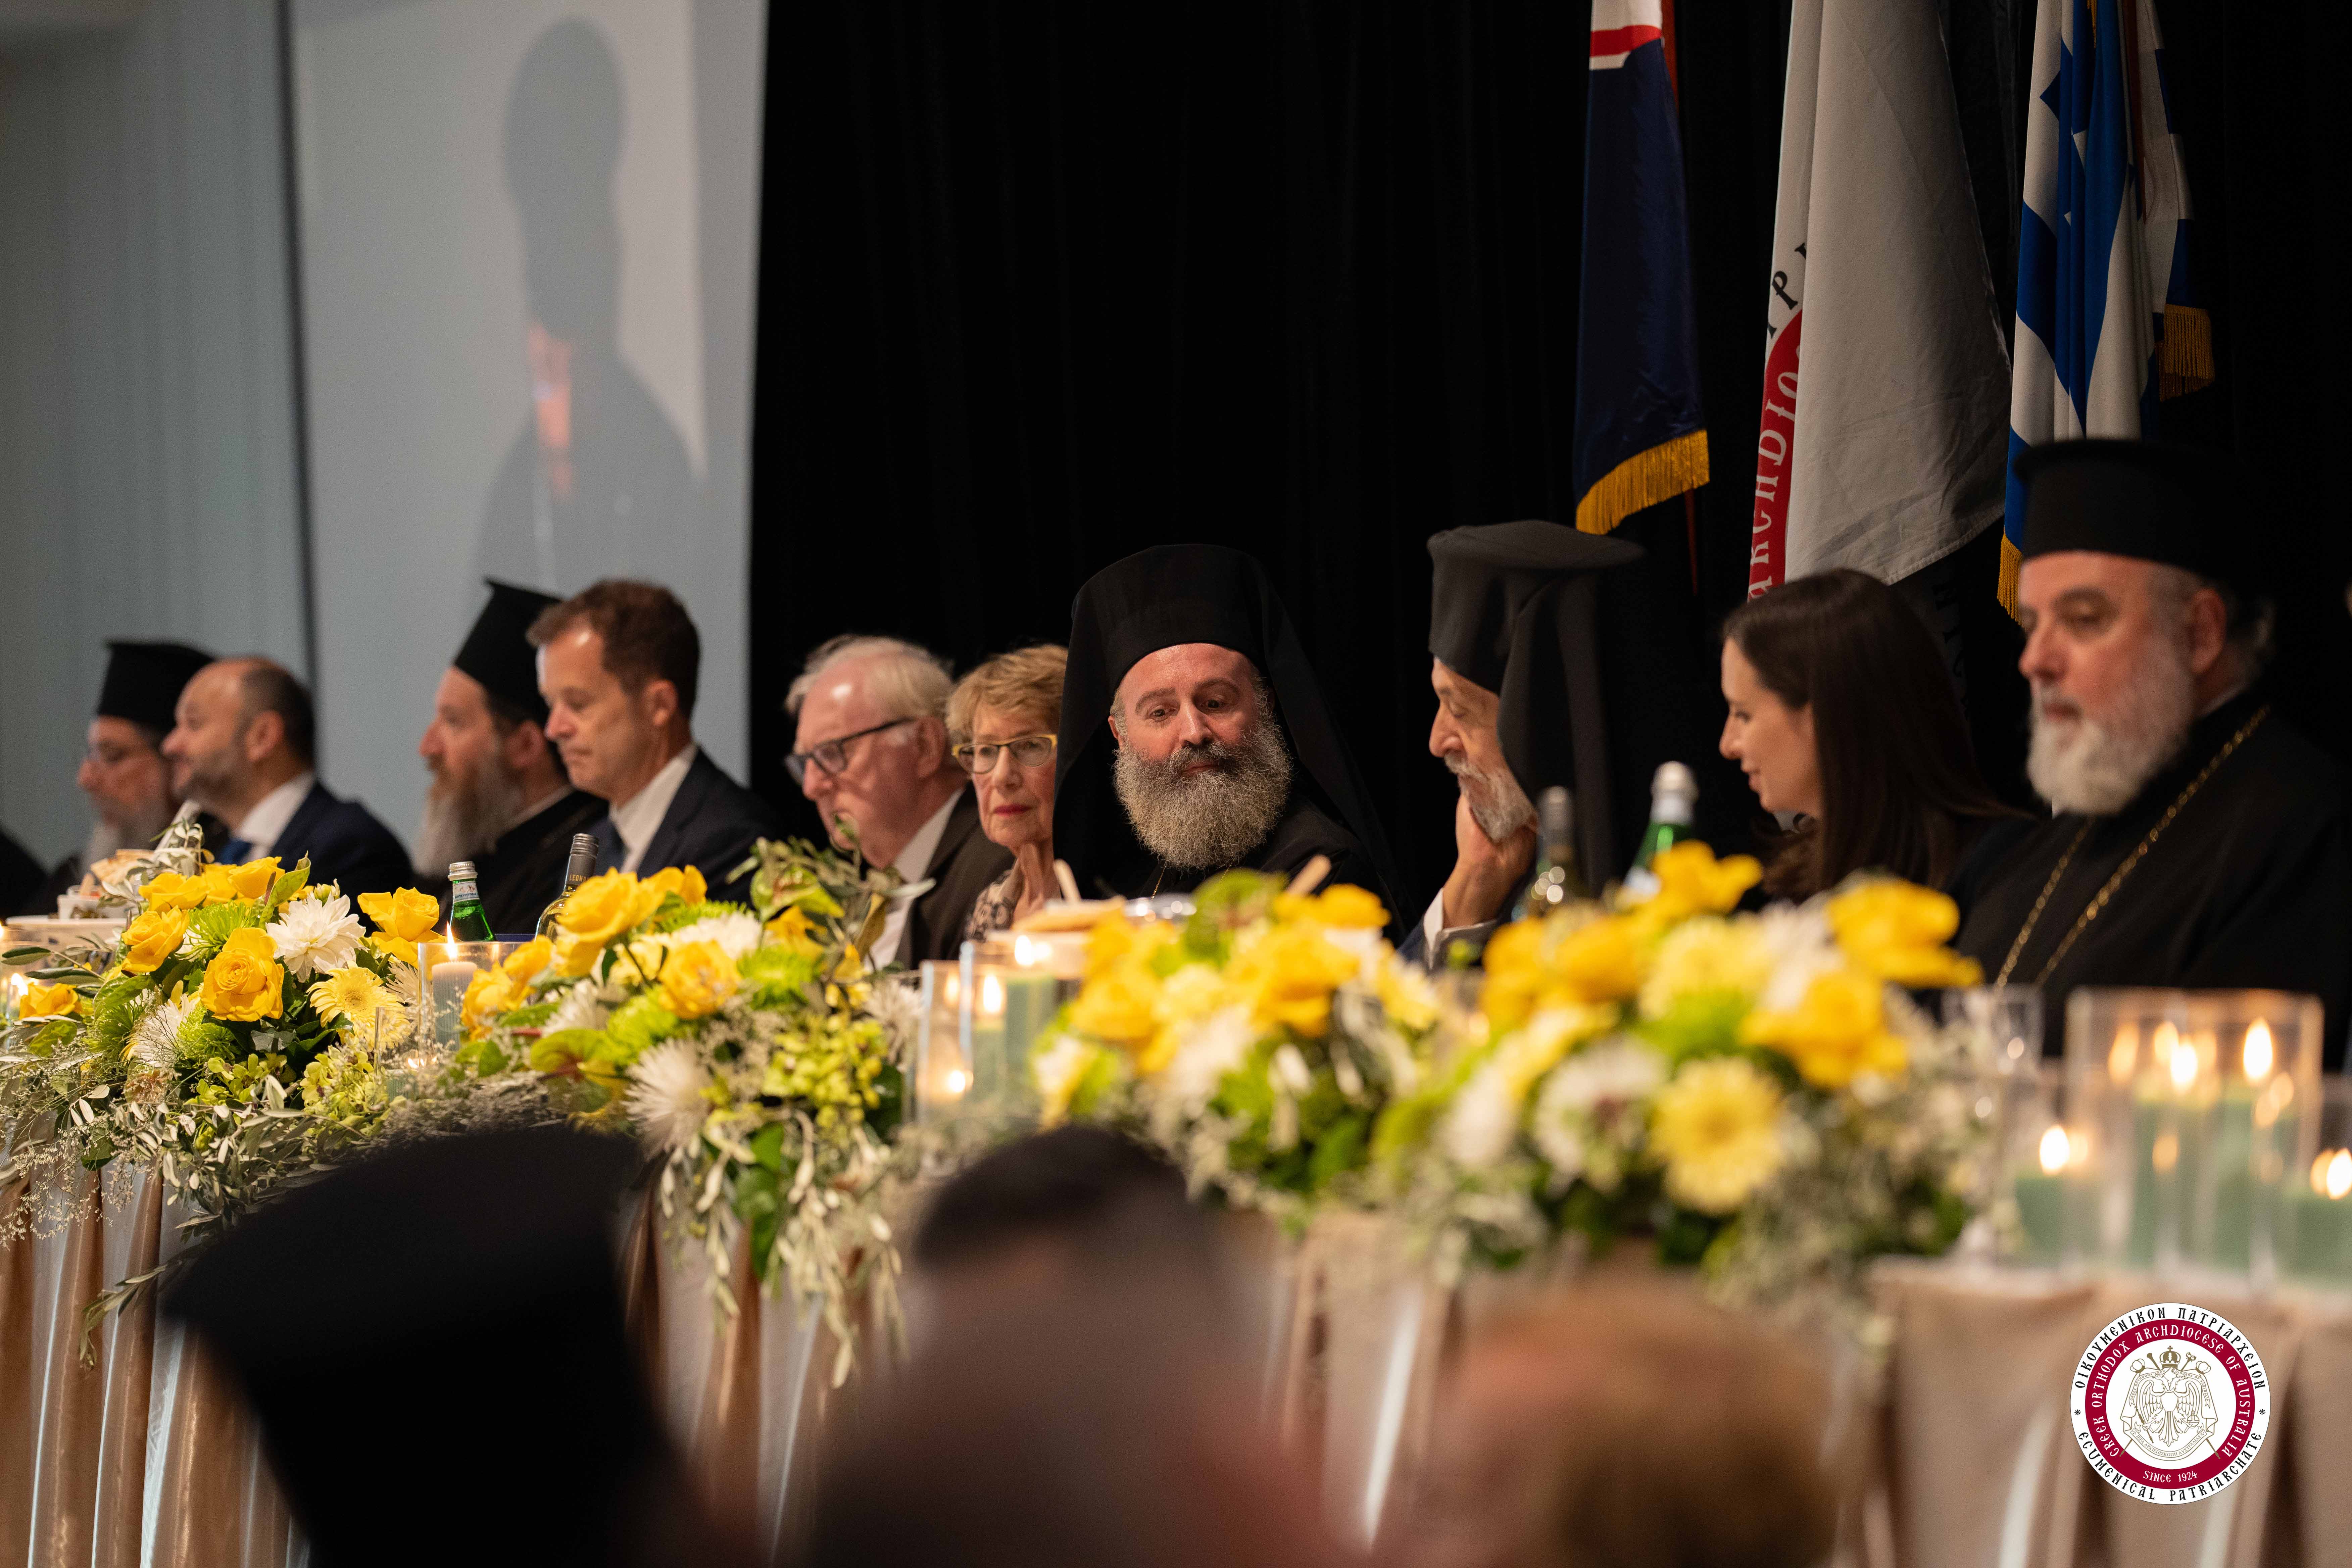 Archbishop Makarios of Australia: “The person who loves is never the weak one”